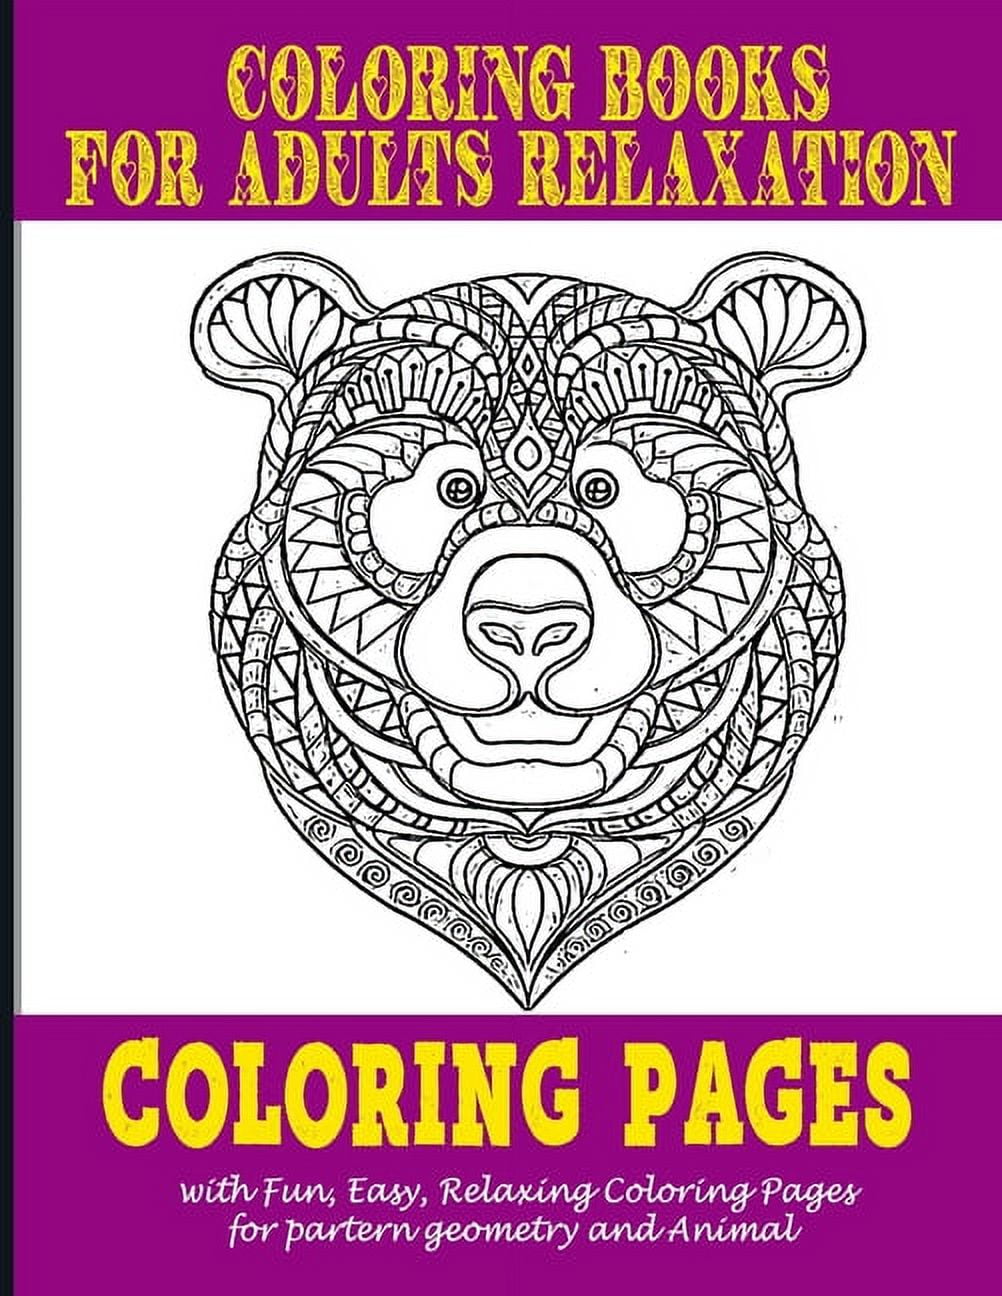 Animal Coloring Books for Relaxation: Cool Adult Coloring Book